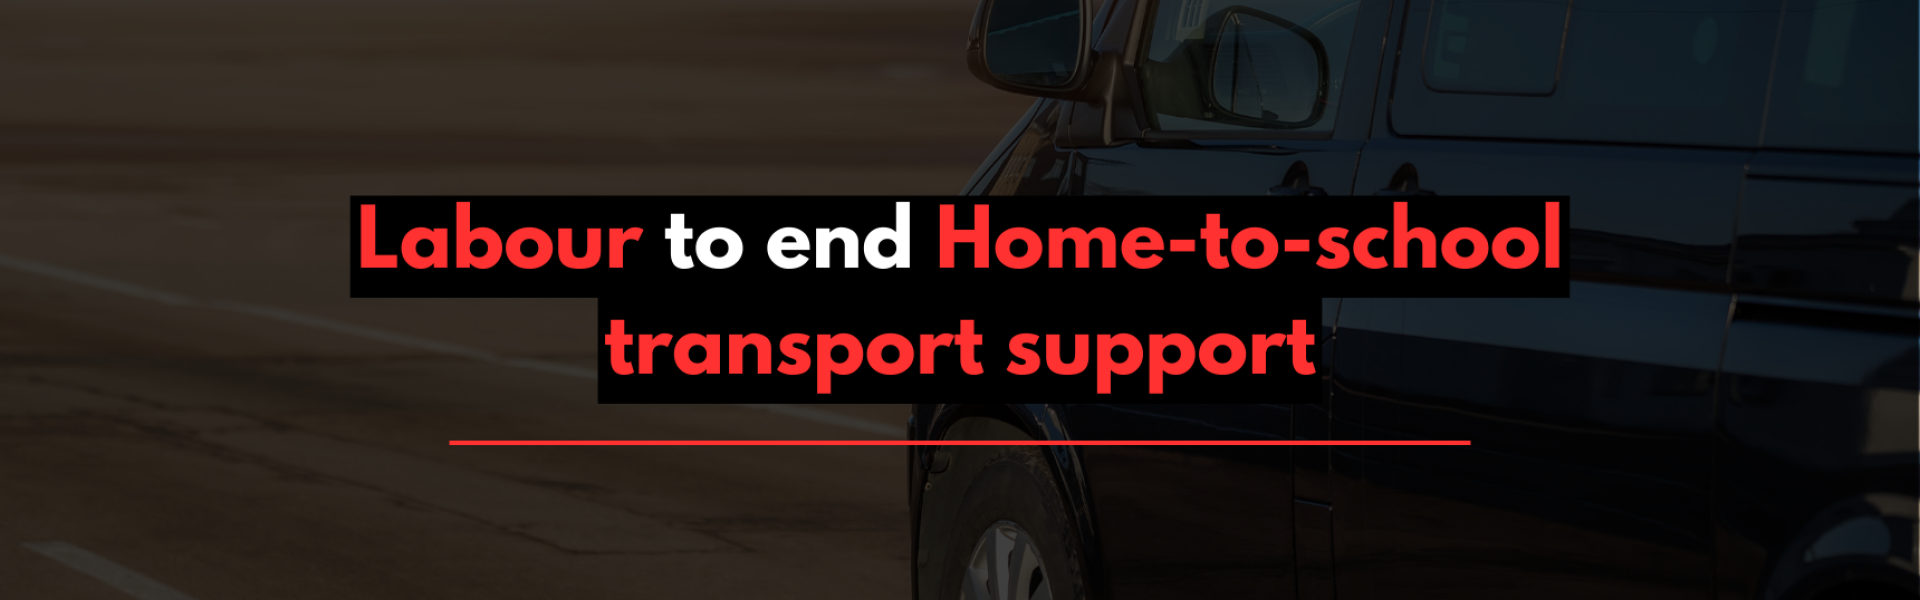 Labour to end home-to-school transport support